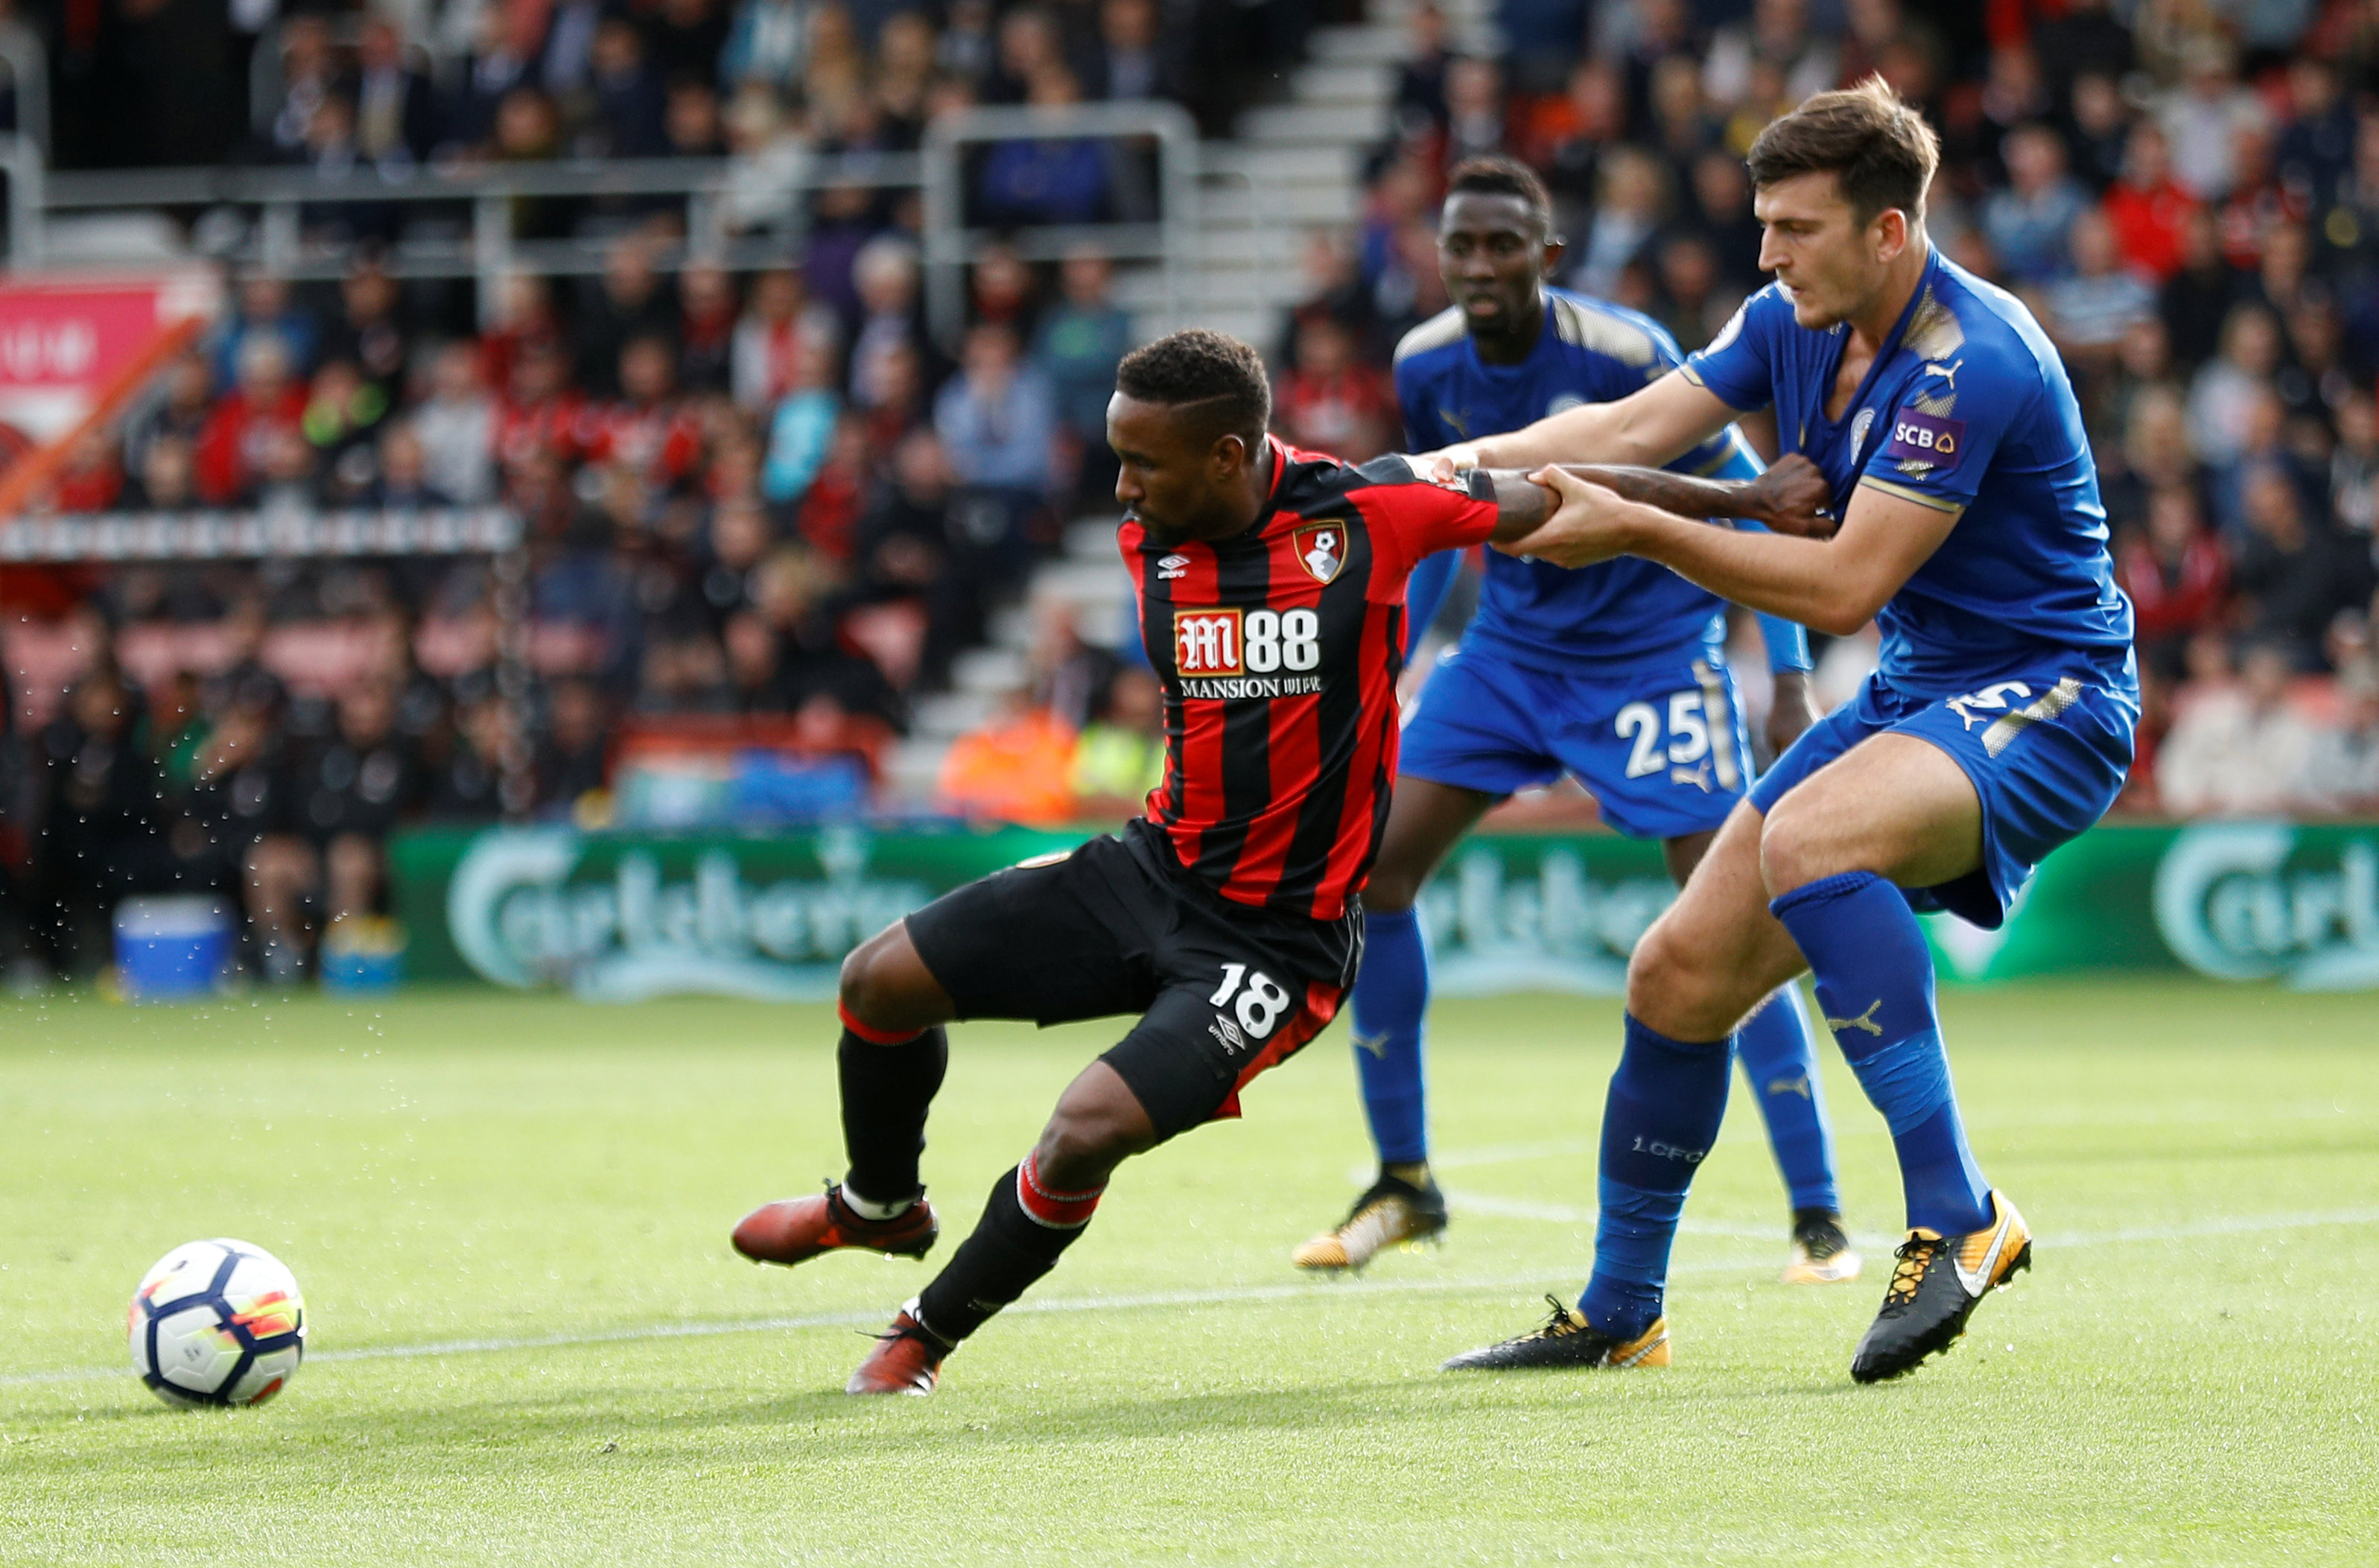 Football: Bournemouth frustrated in draw with Leicester City